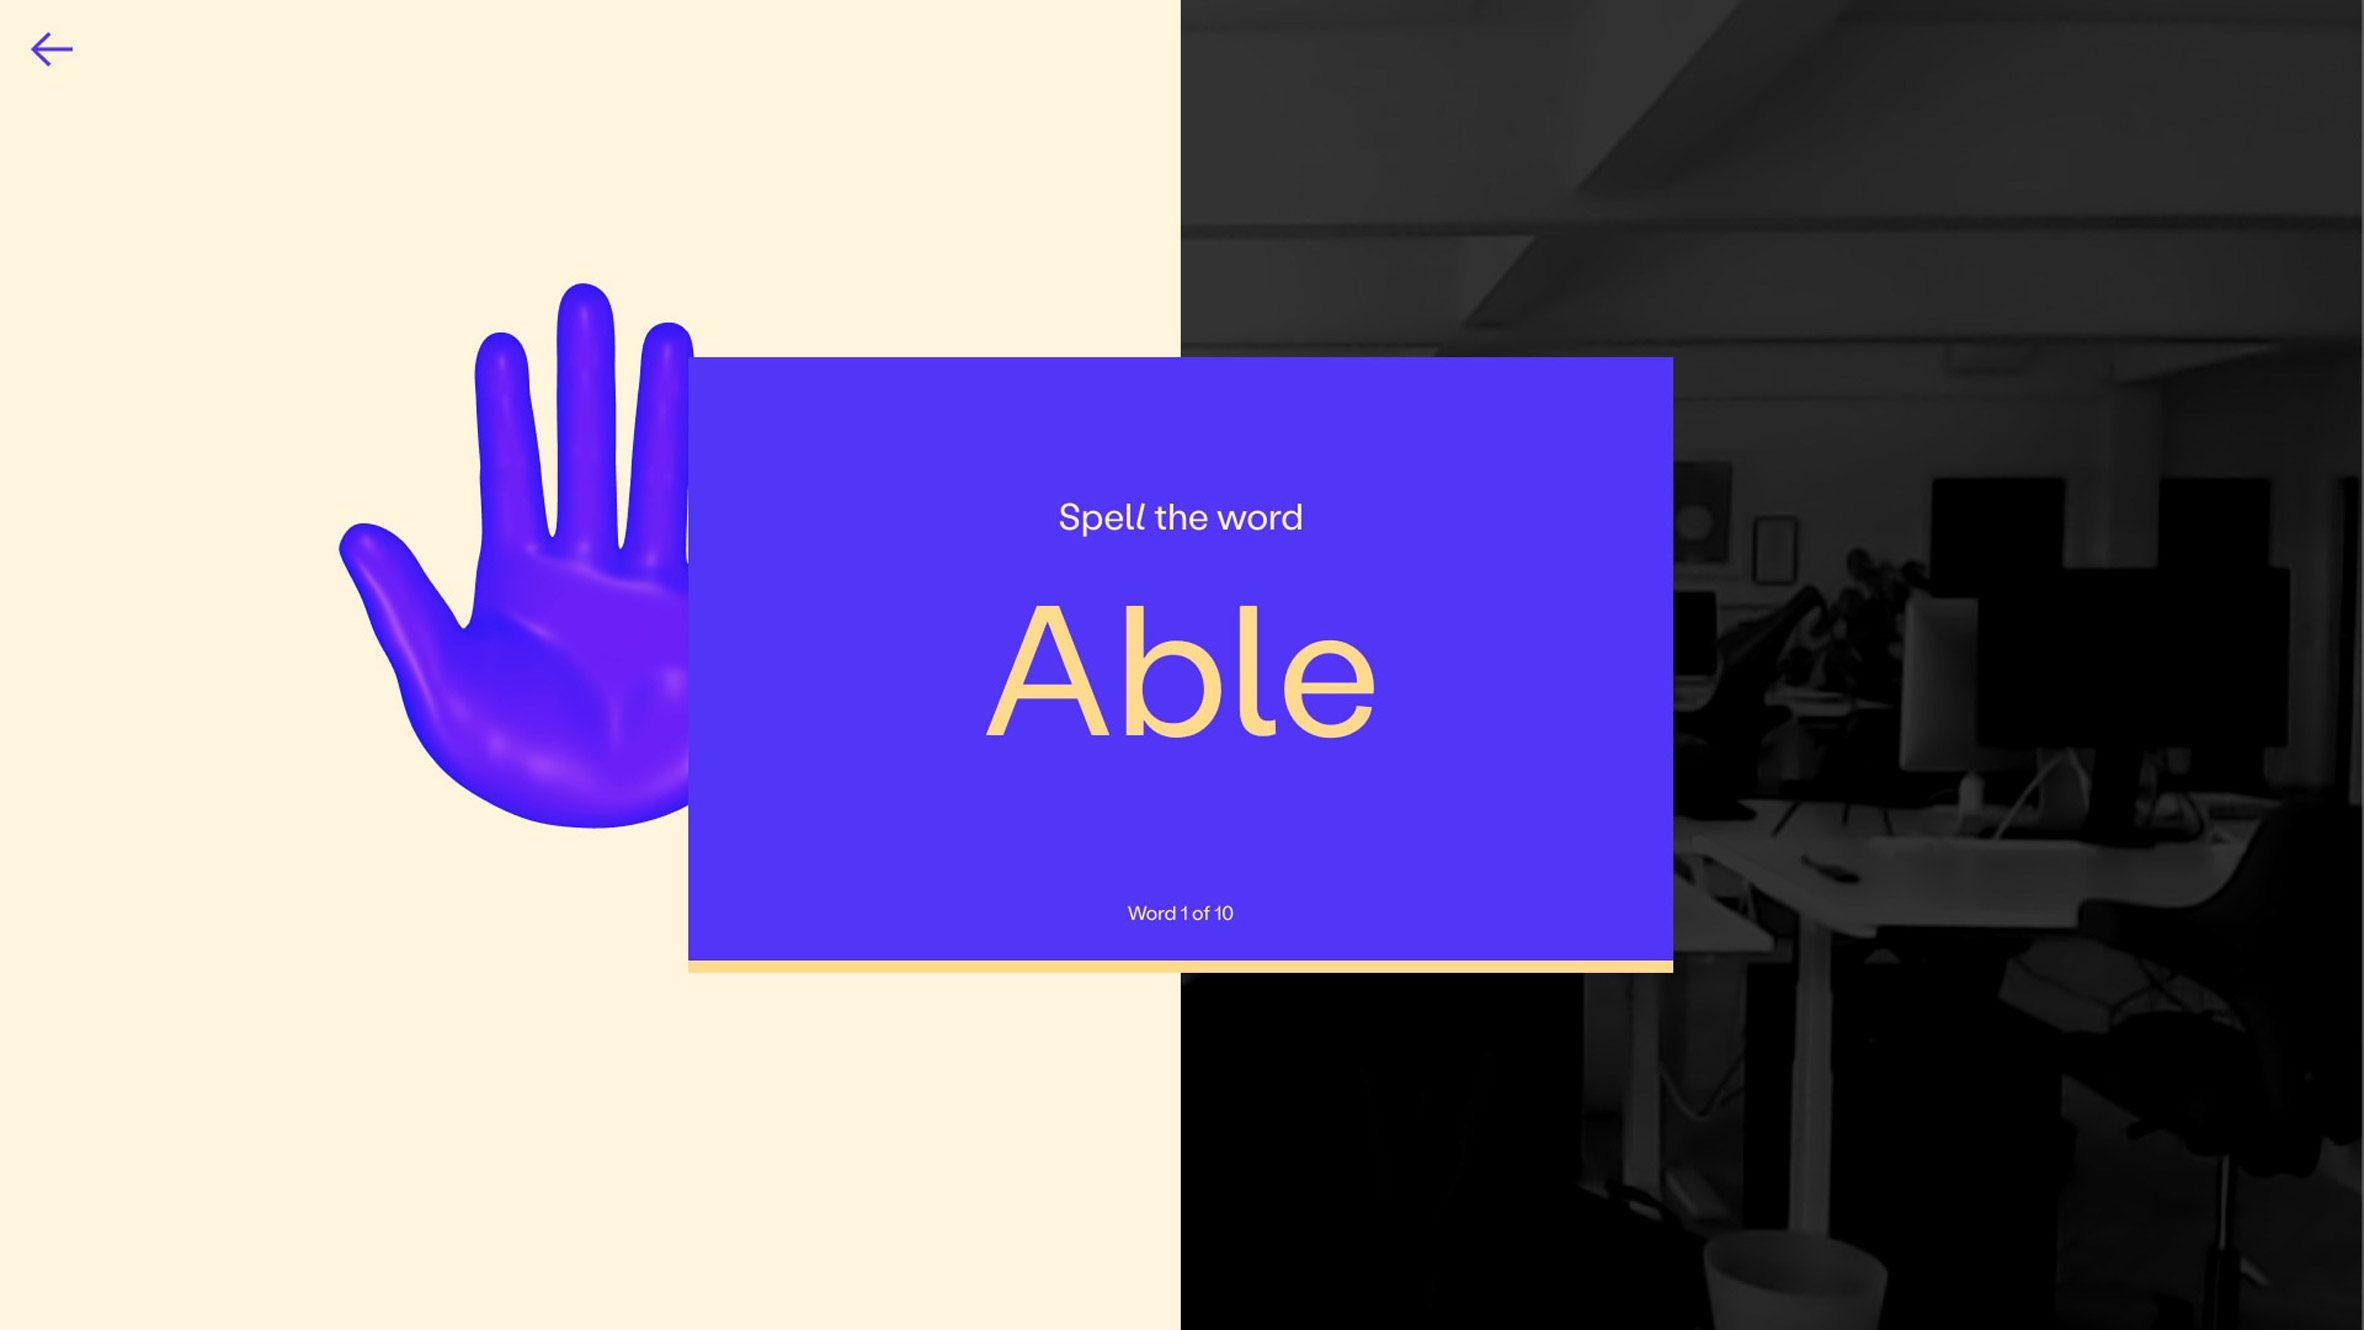 A level one screen tells the user they will be learning to spell the word 'able'